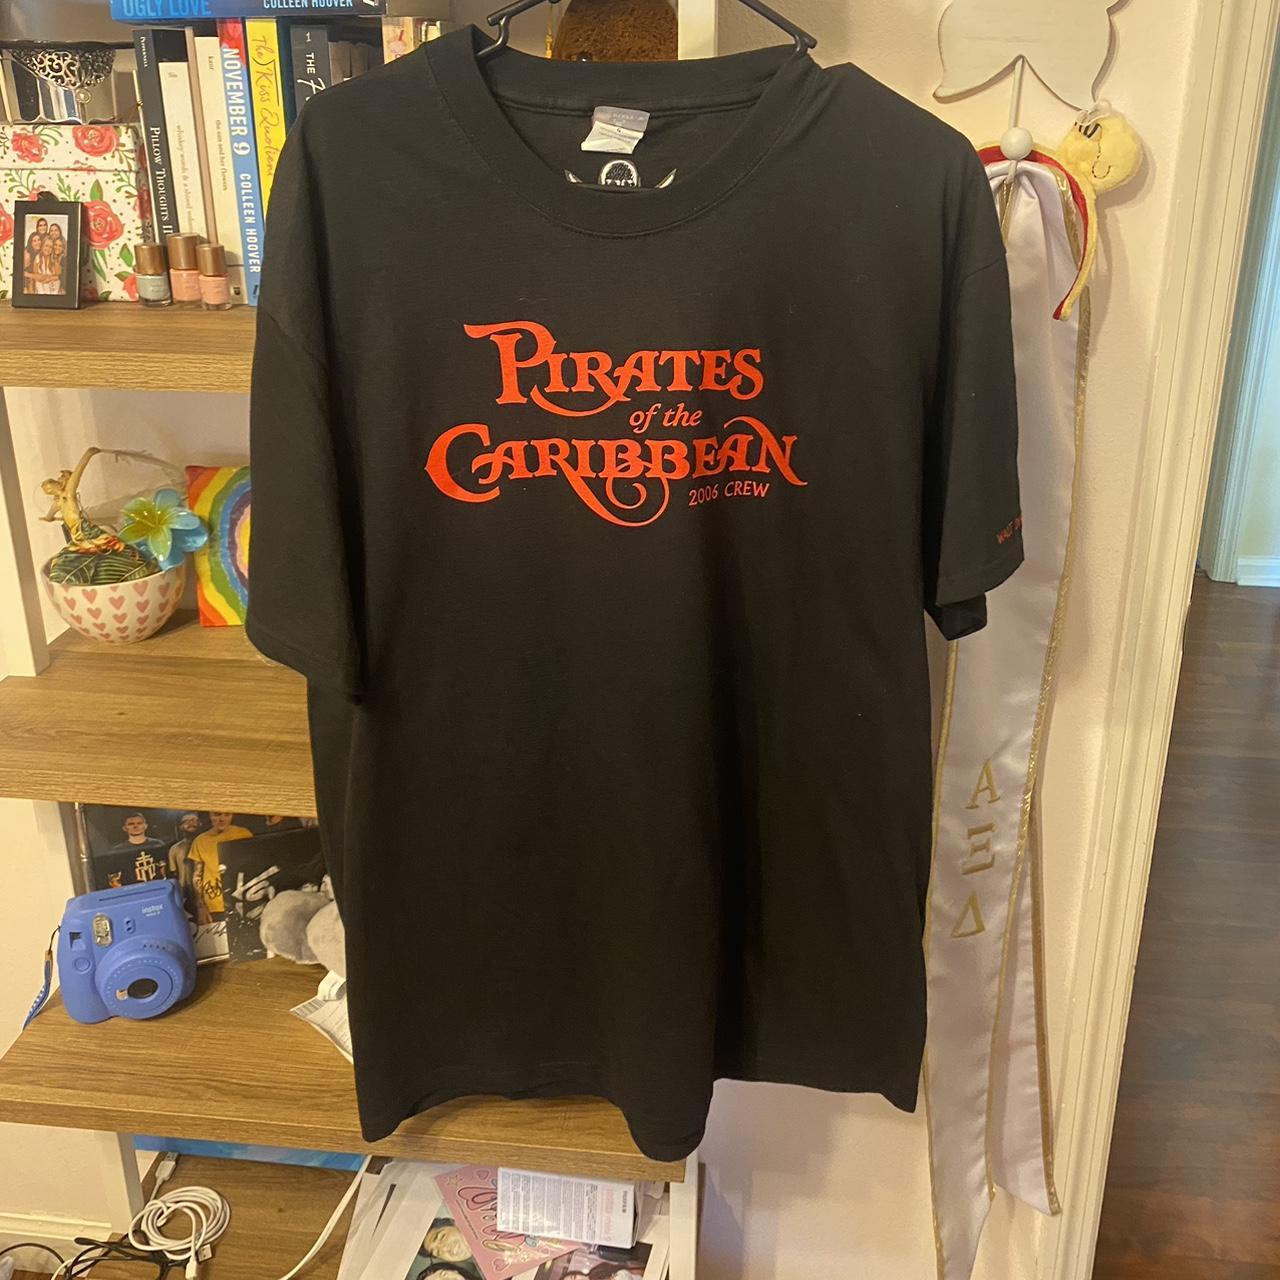 Vintage Pirates of the Caribbean tee